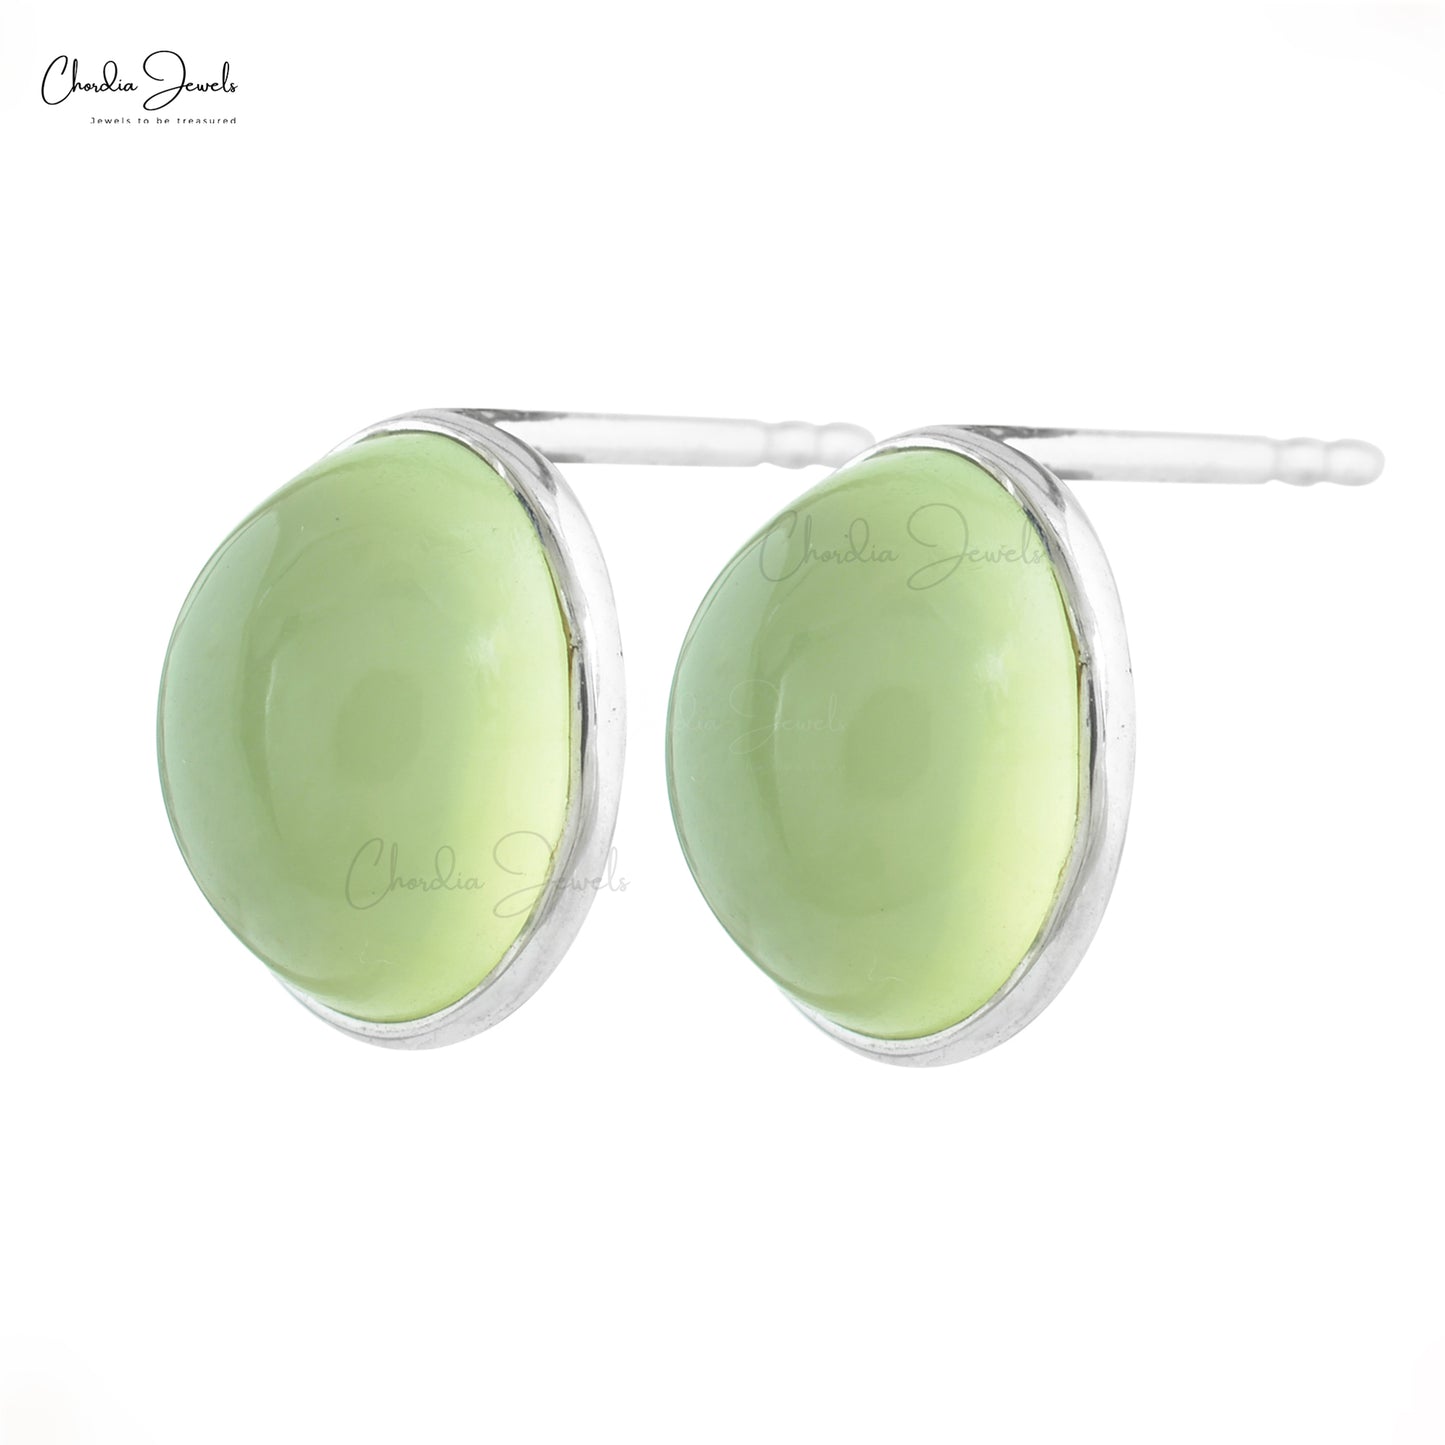 Hot Selling Generous and Simple Solitaire Earrings Oval Shape Natural Prehnite Gemstone Earring in 14k Solid White Gold Hallmarked Jewelry For Bridesmaid Gift